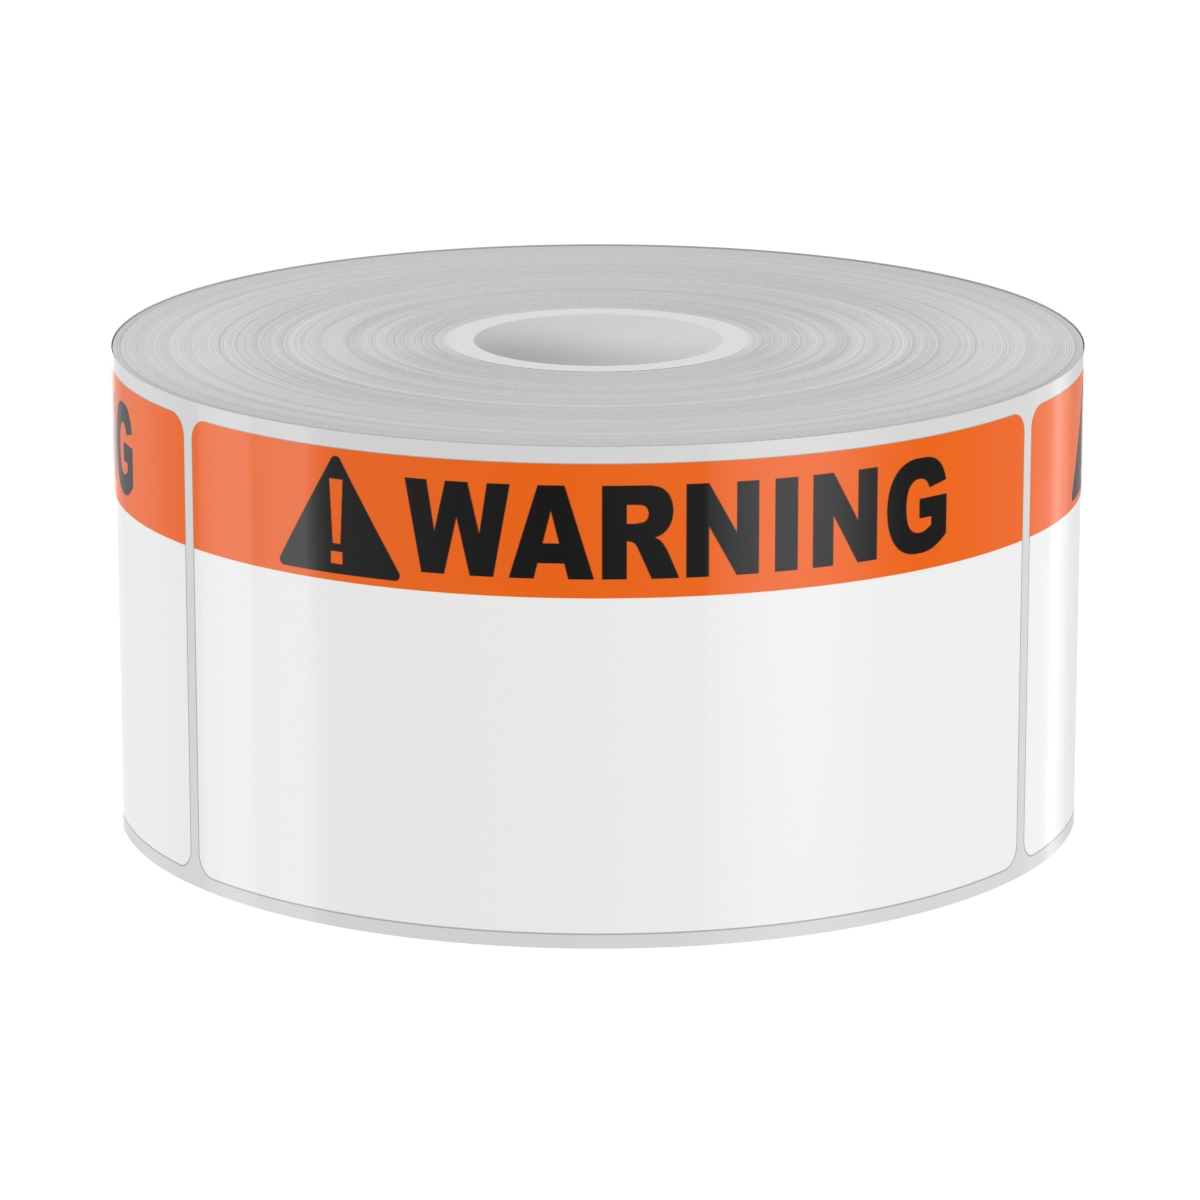 Detail view for 250 2" x 4" High-Performance Orange Band with Black Warning